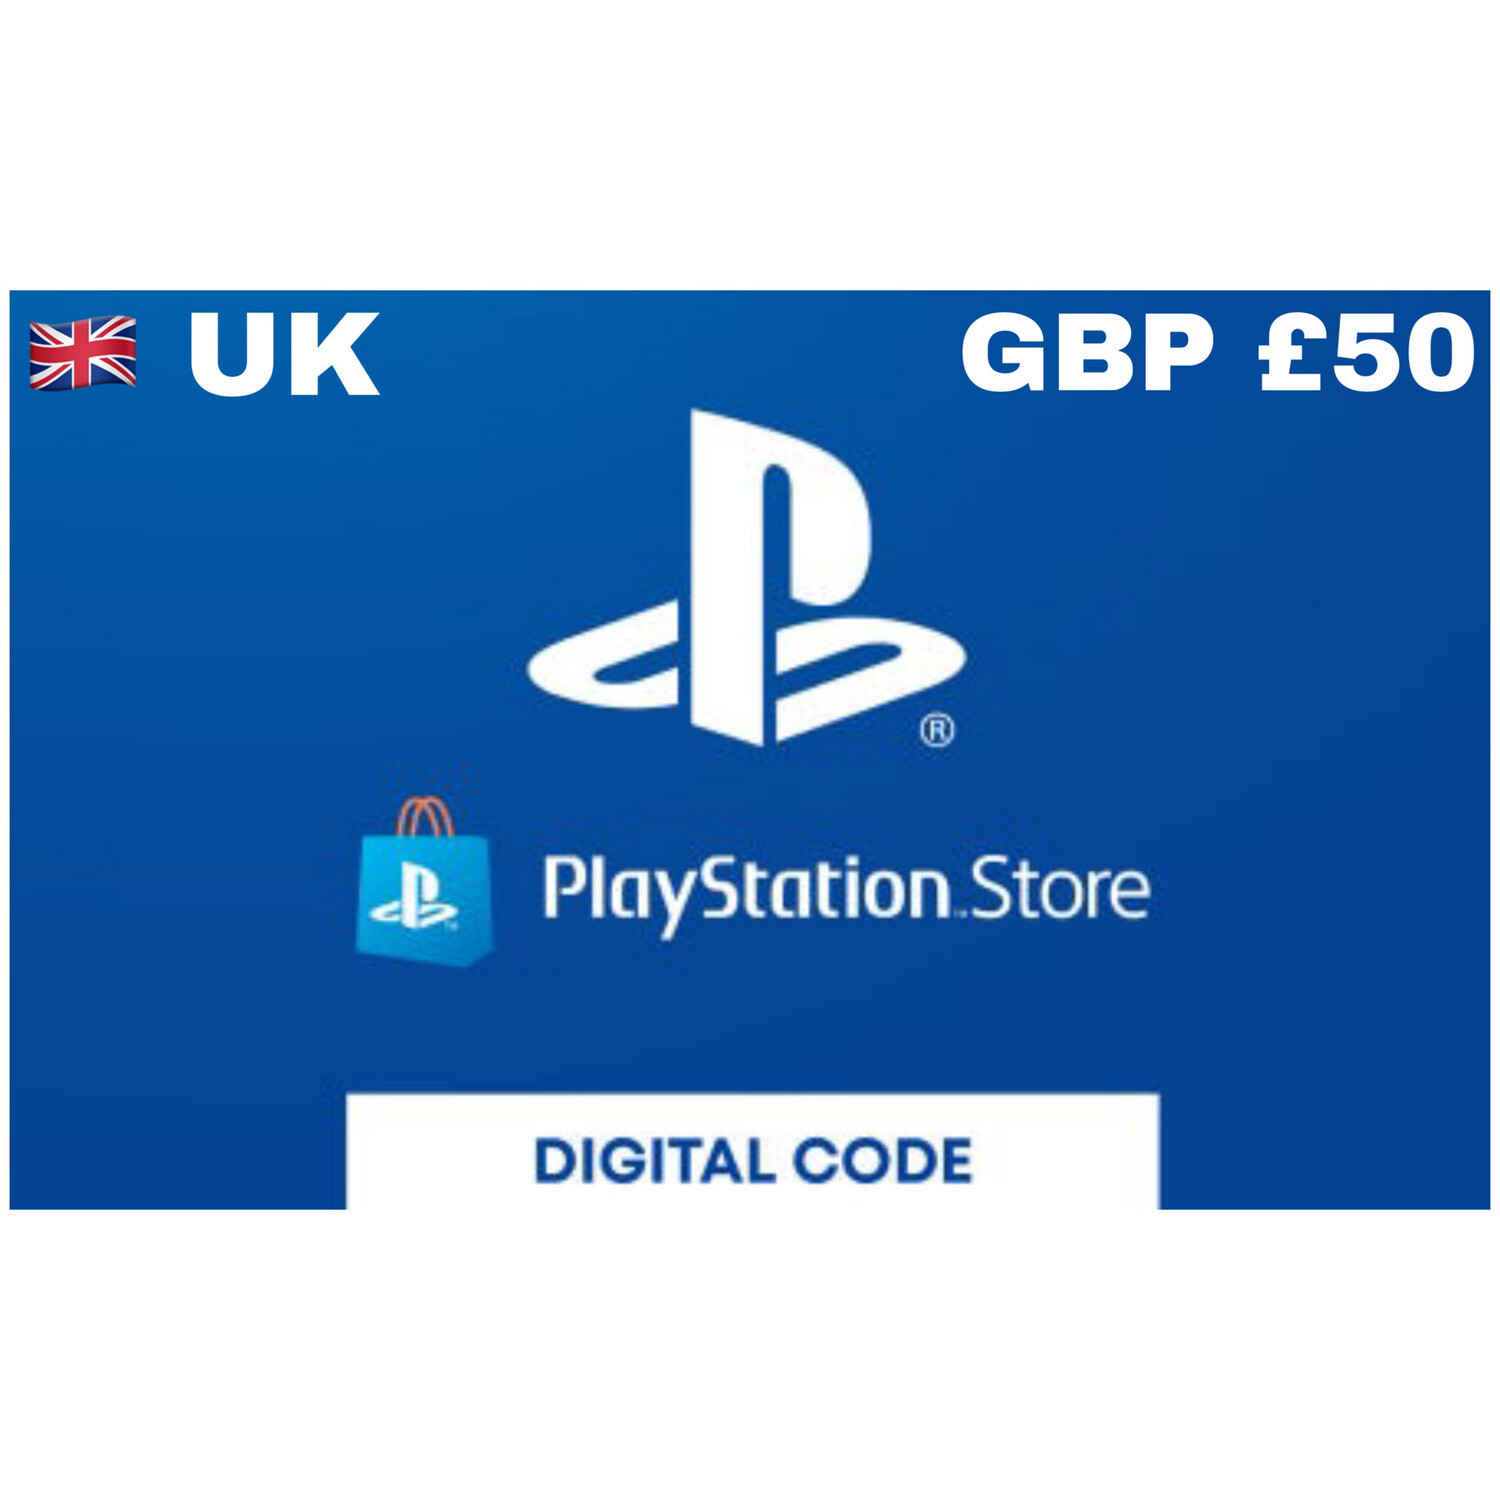 Playstation Store Gift Card UK GBP £50